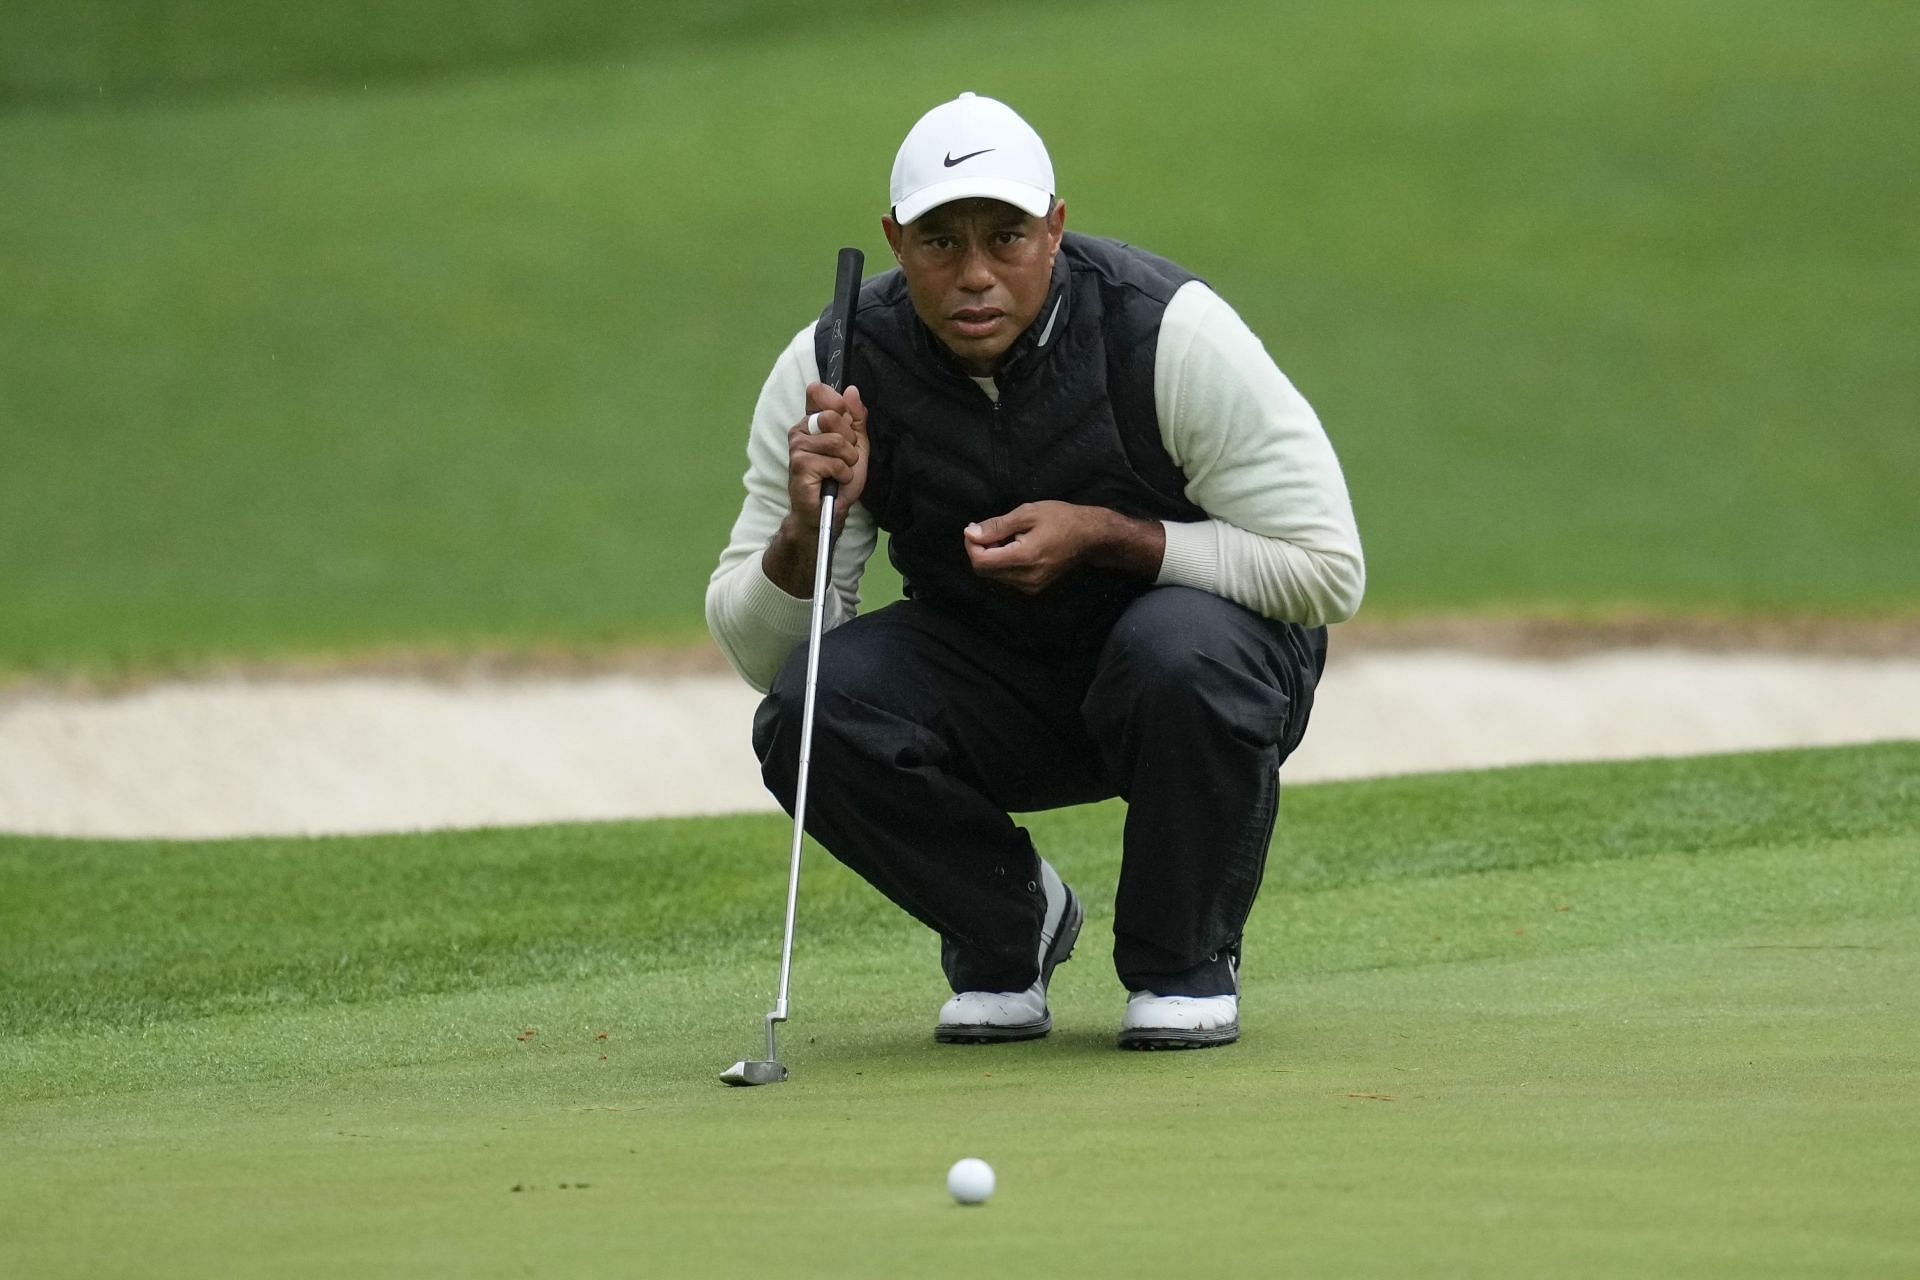 Tiger Woods lines up a putt on the 16th hole during the weather-delayed second round of the Masters golf tournament at Augusta National Golf Club